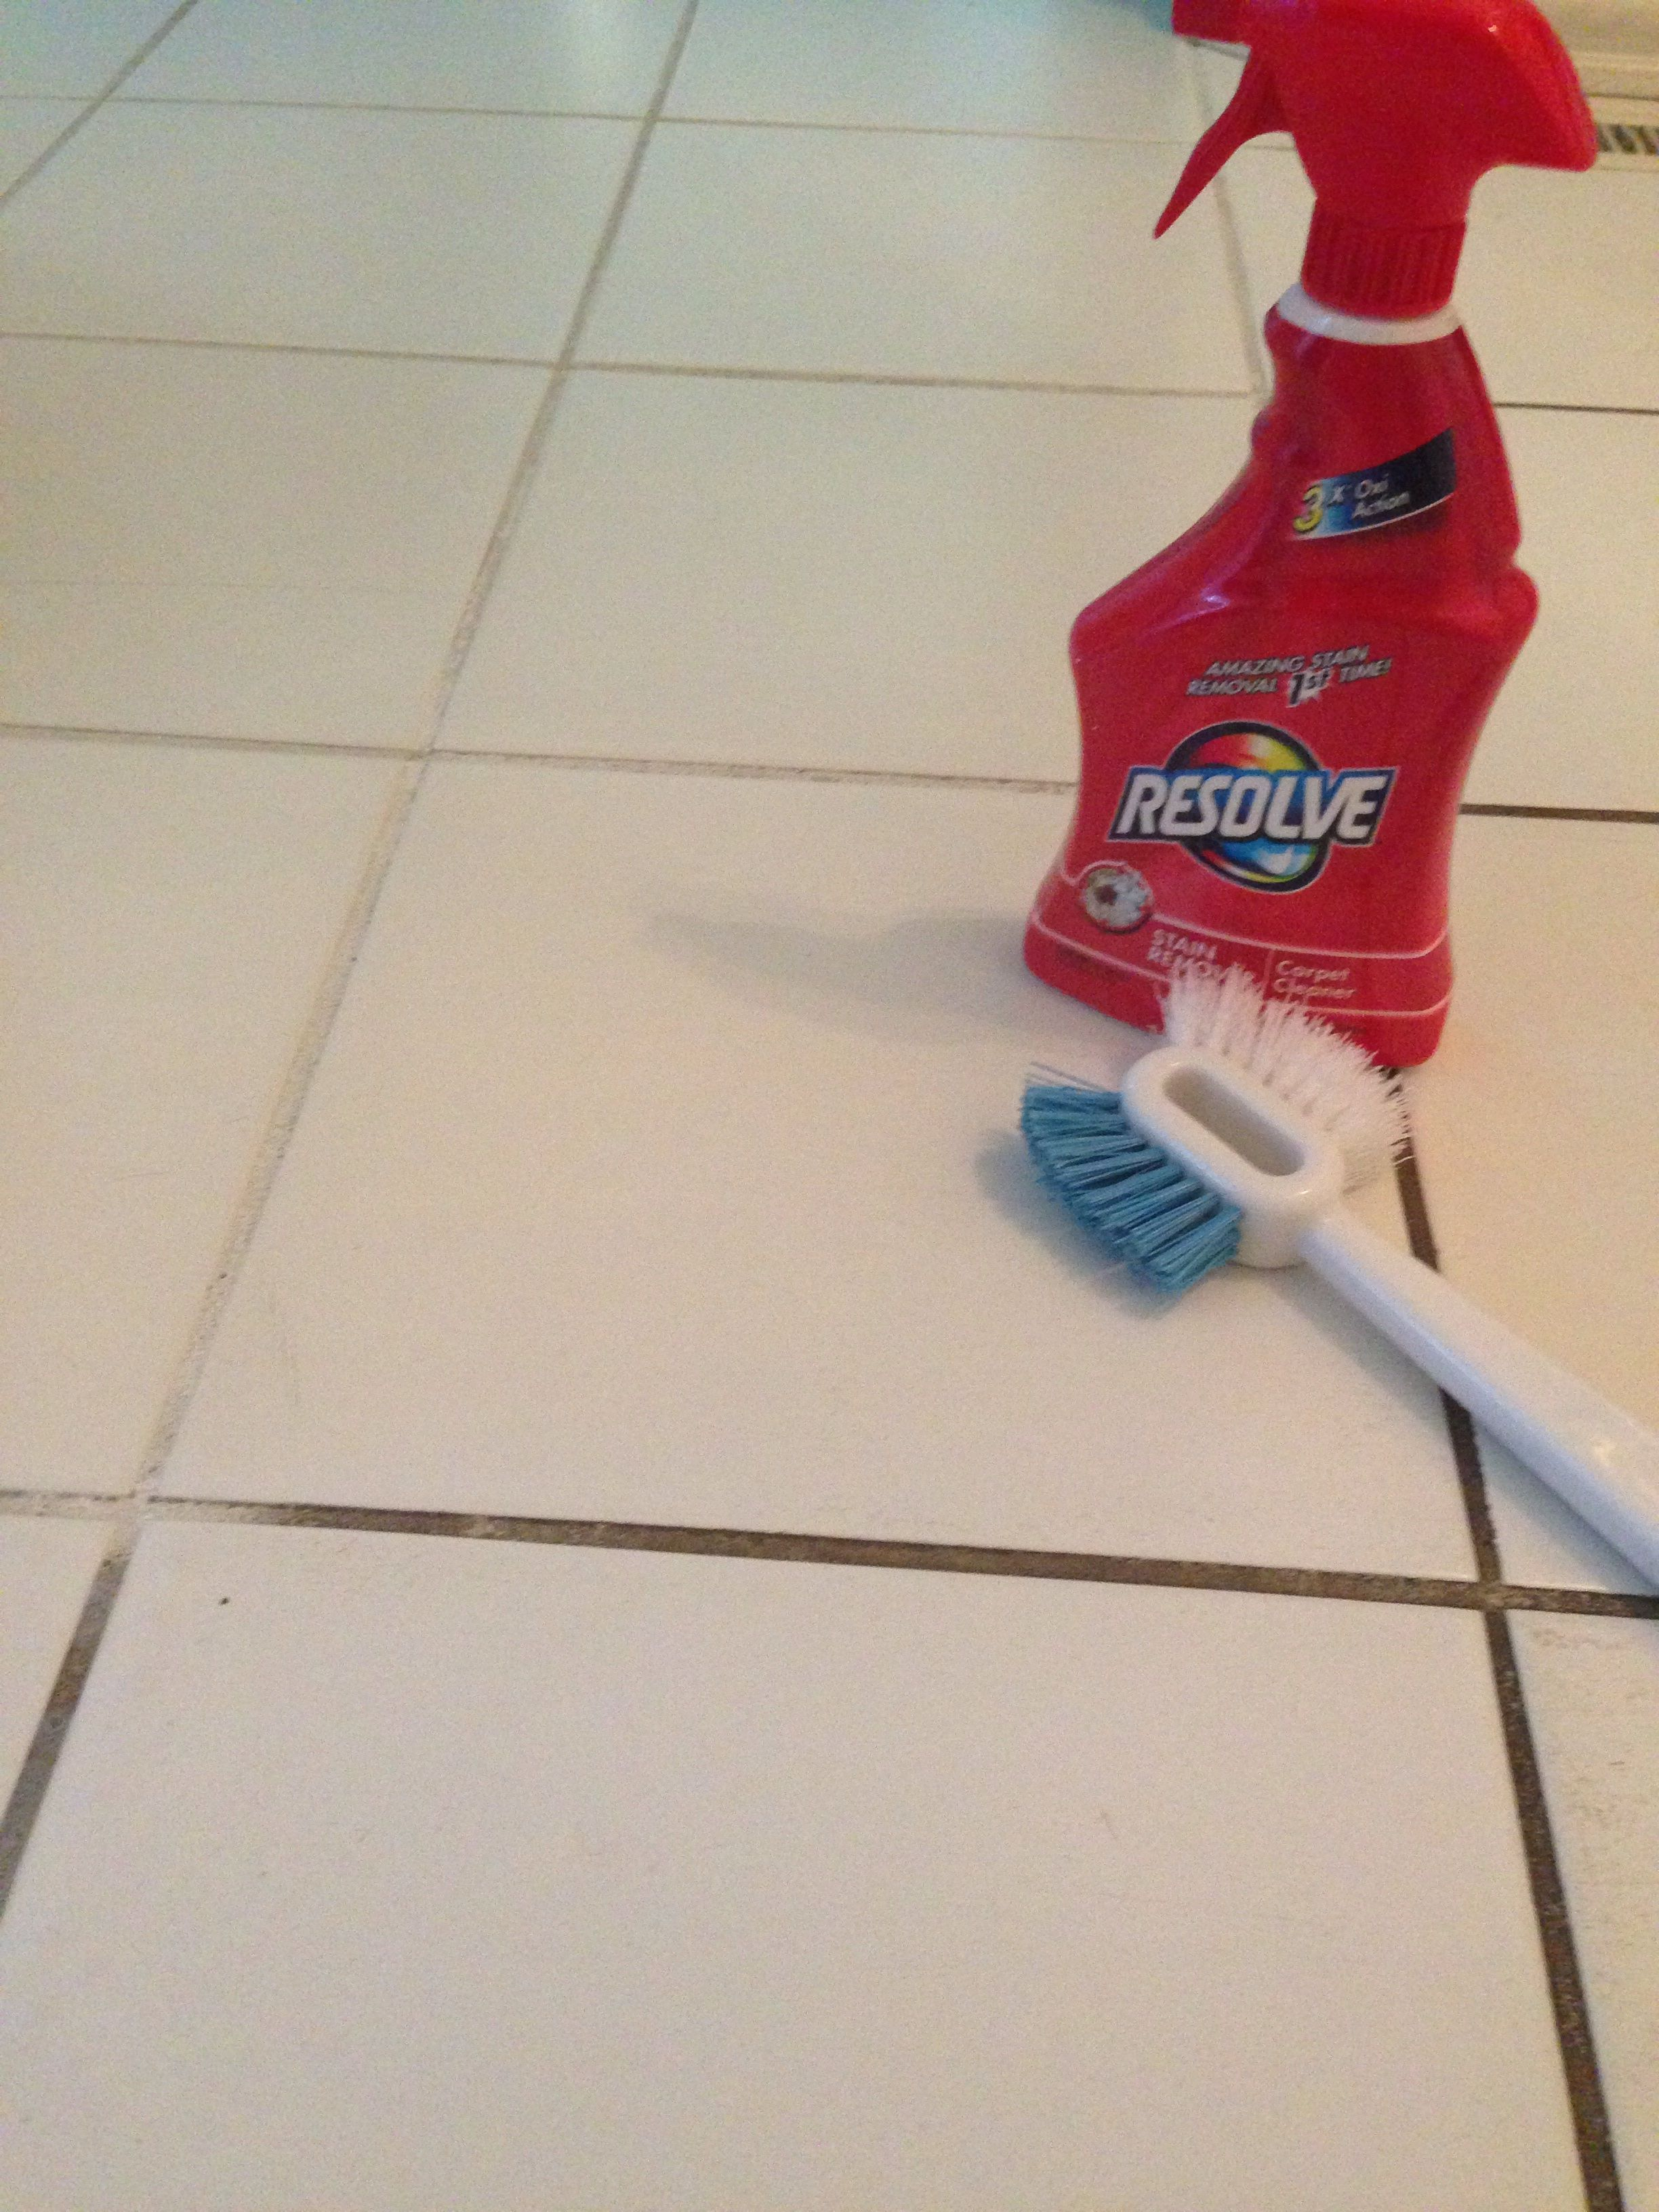 Resolve Carpet Cleaner To Clean Grout Cleaning Hacks pertaining to proportions 2448 X 3264